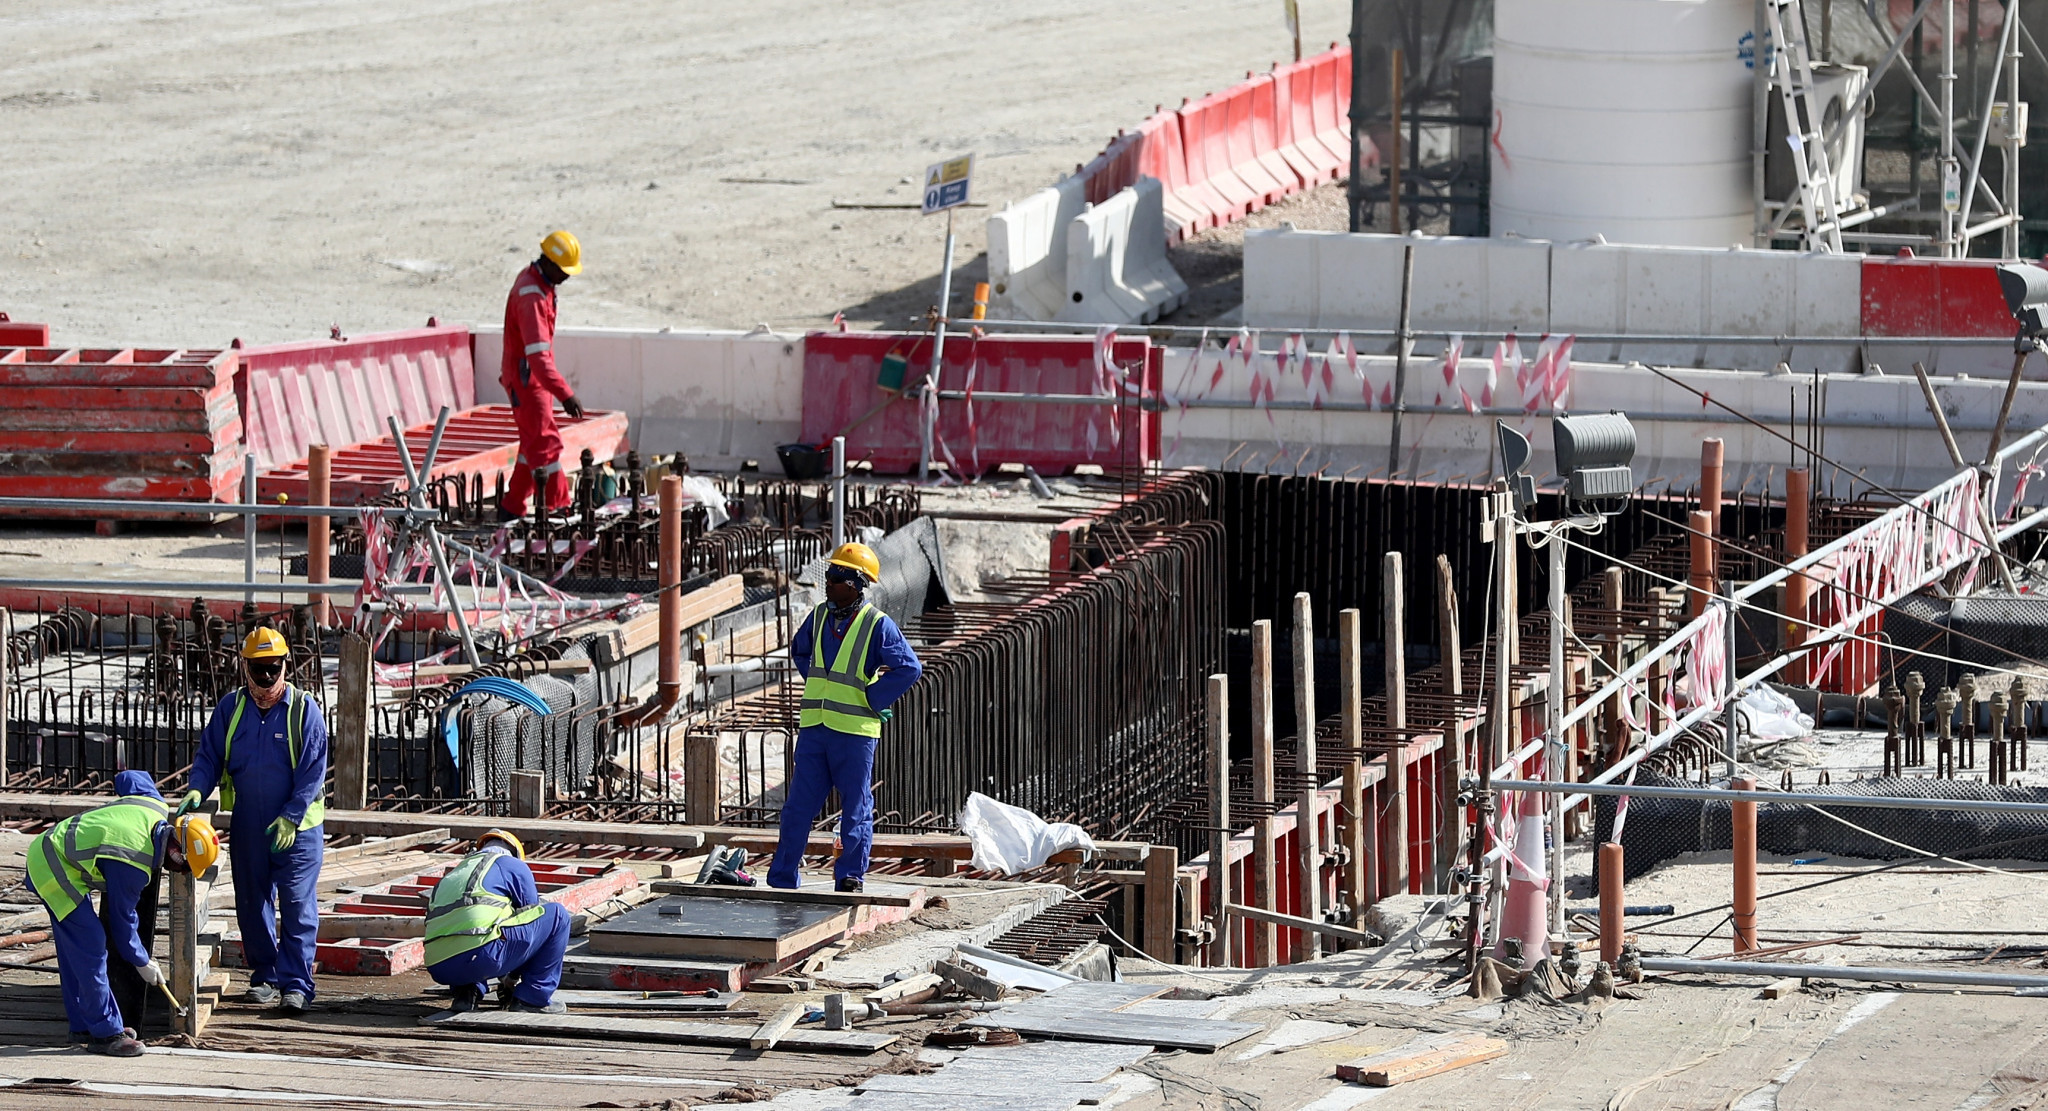 Human Rights Watch calls on FIFA to urge Qatar to enforce outdoor work restrictions